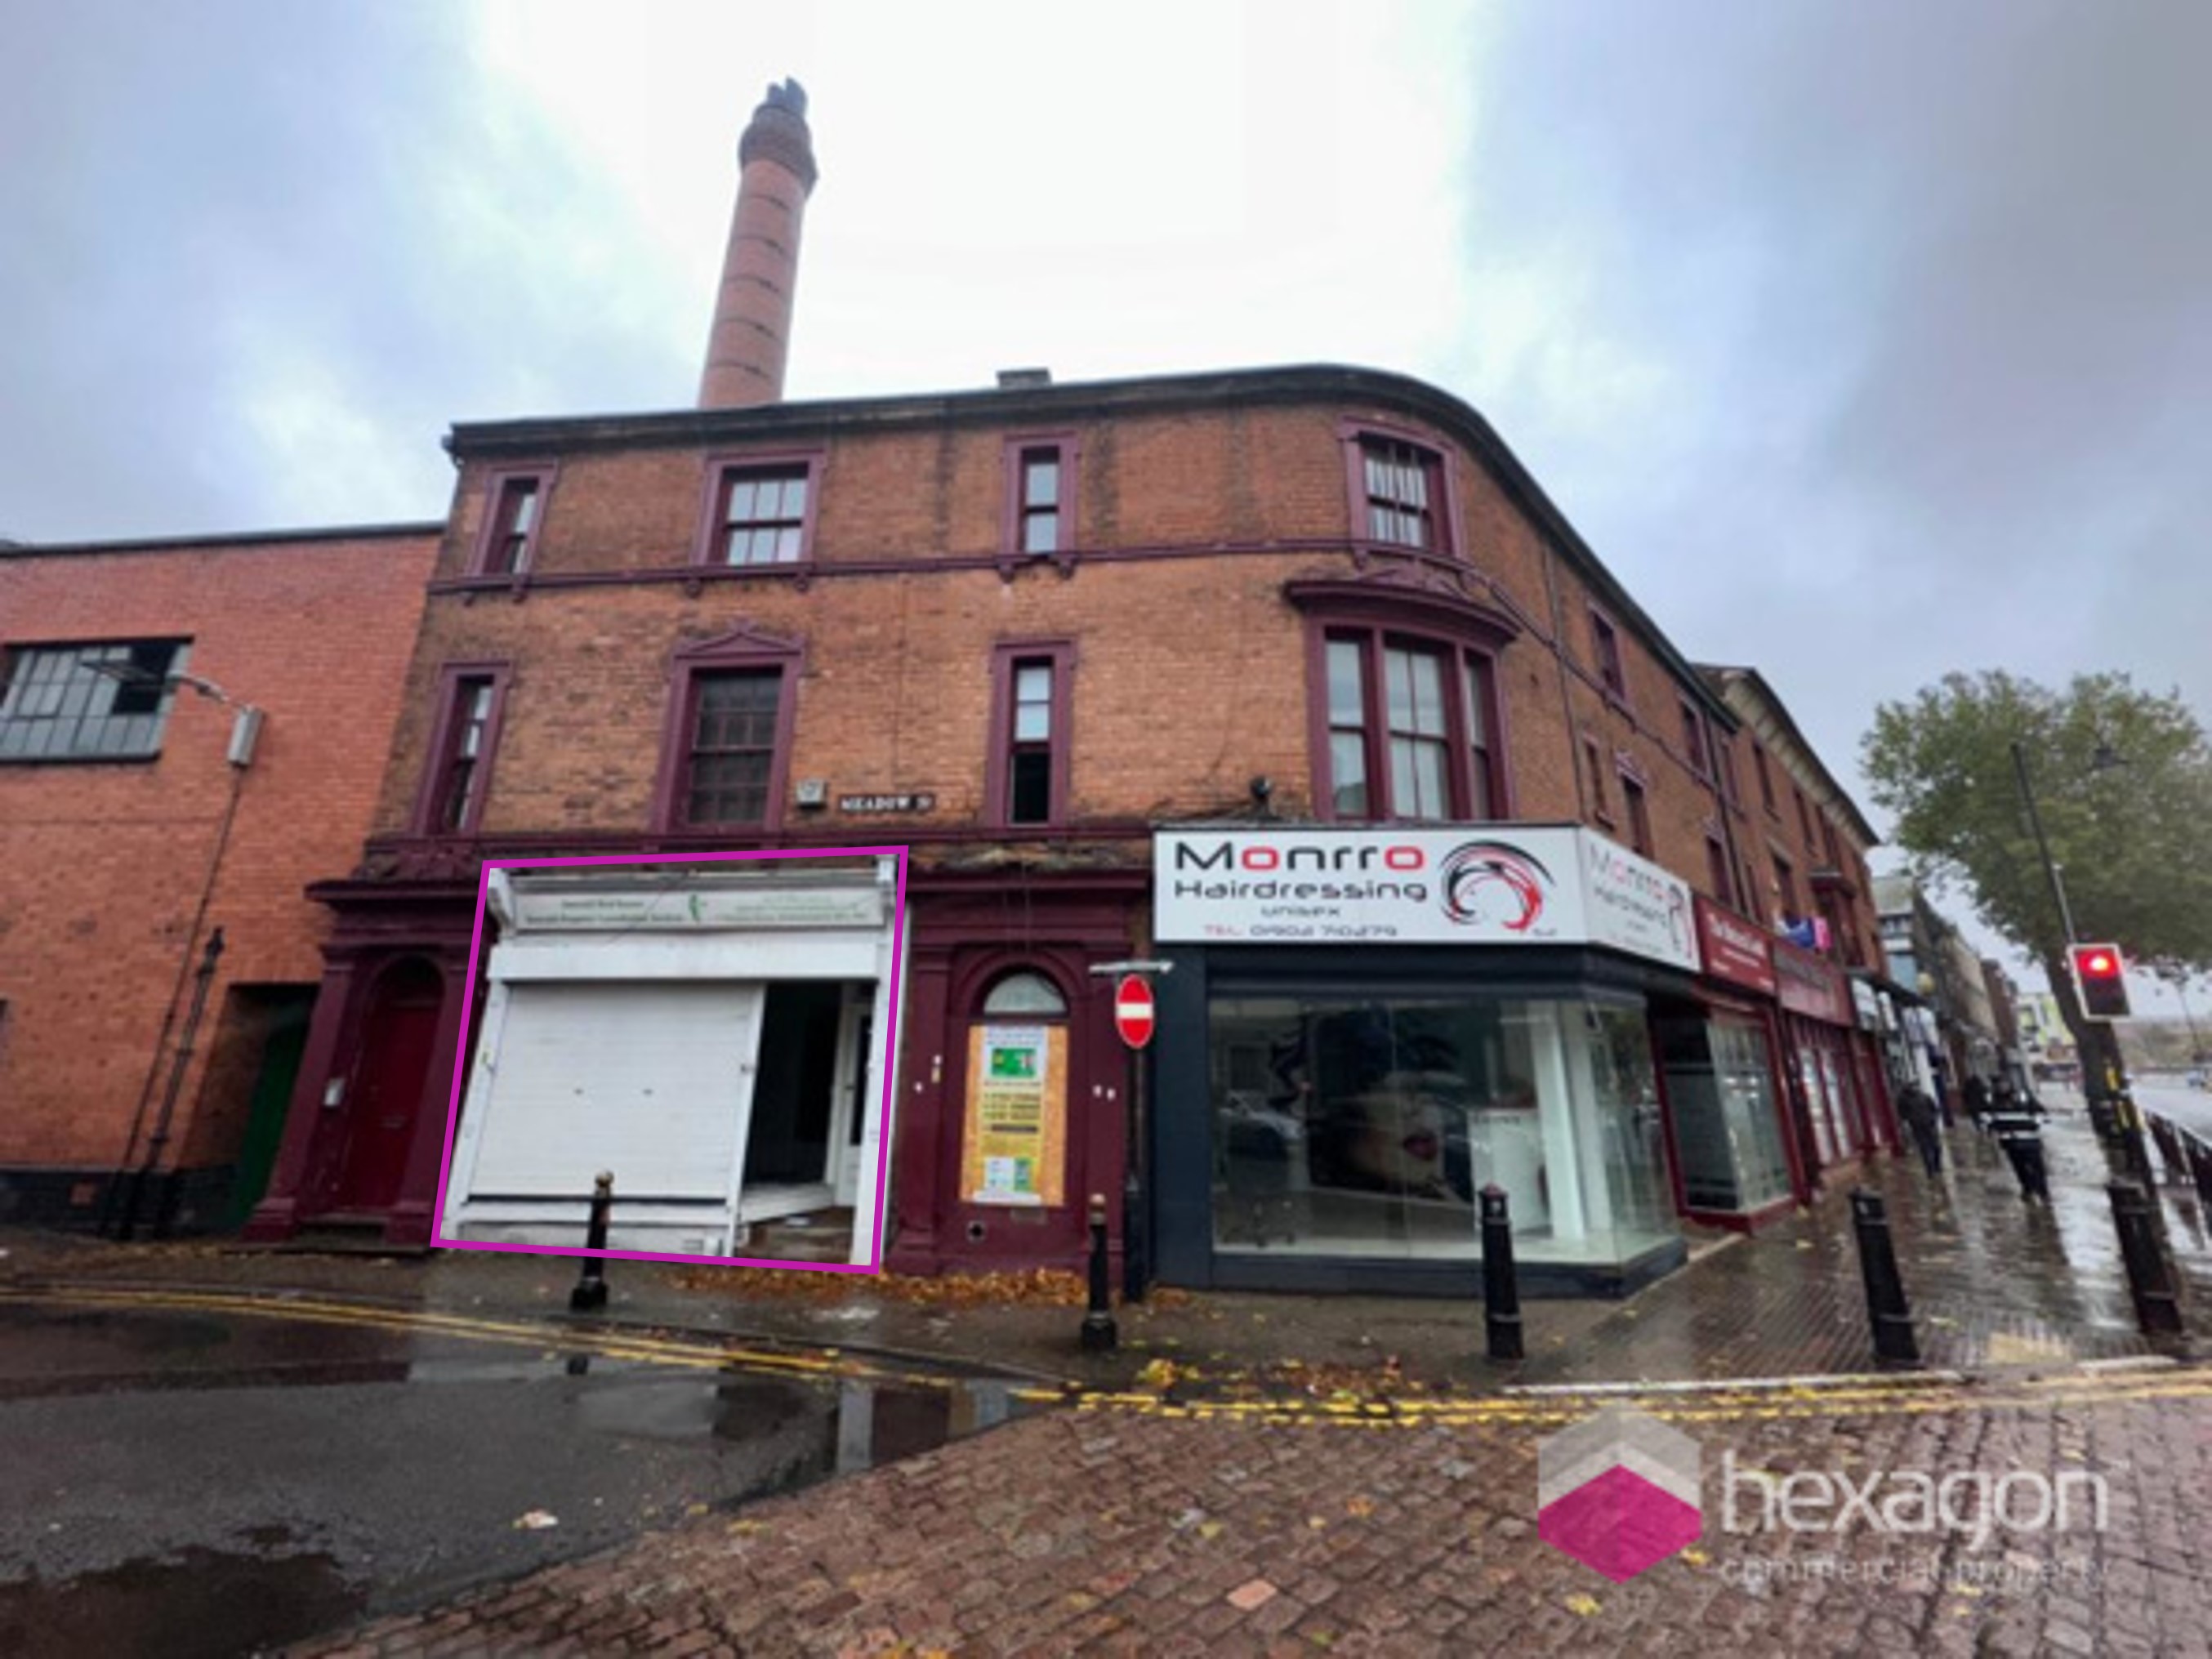 Retail Property (High Street) for rent in Wolverhampton. From Hexagon Commercial Property